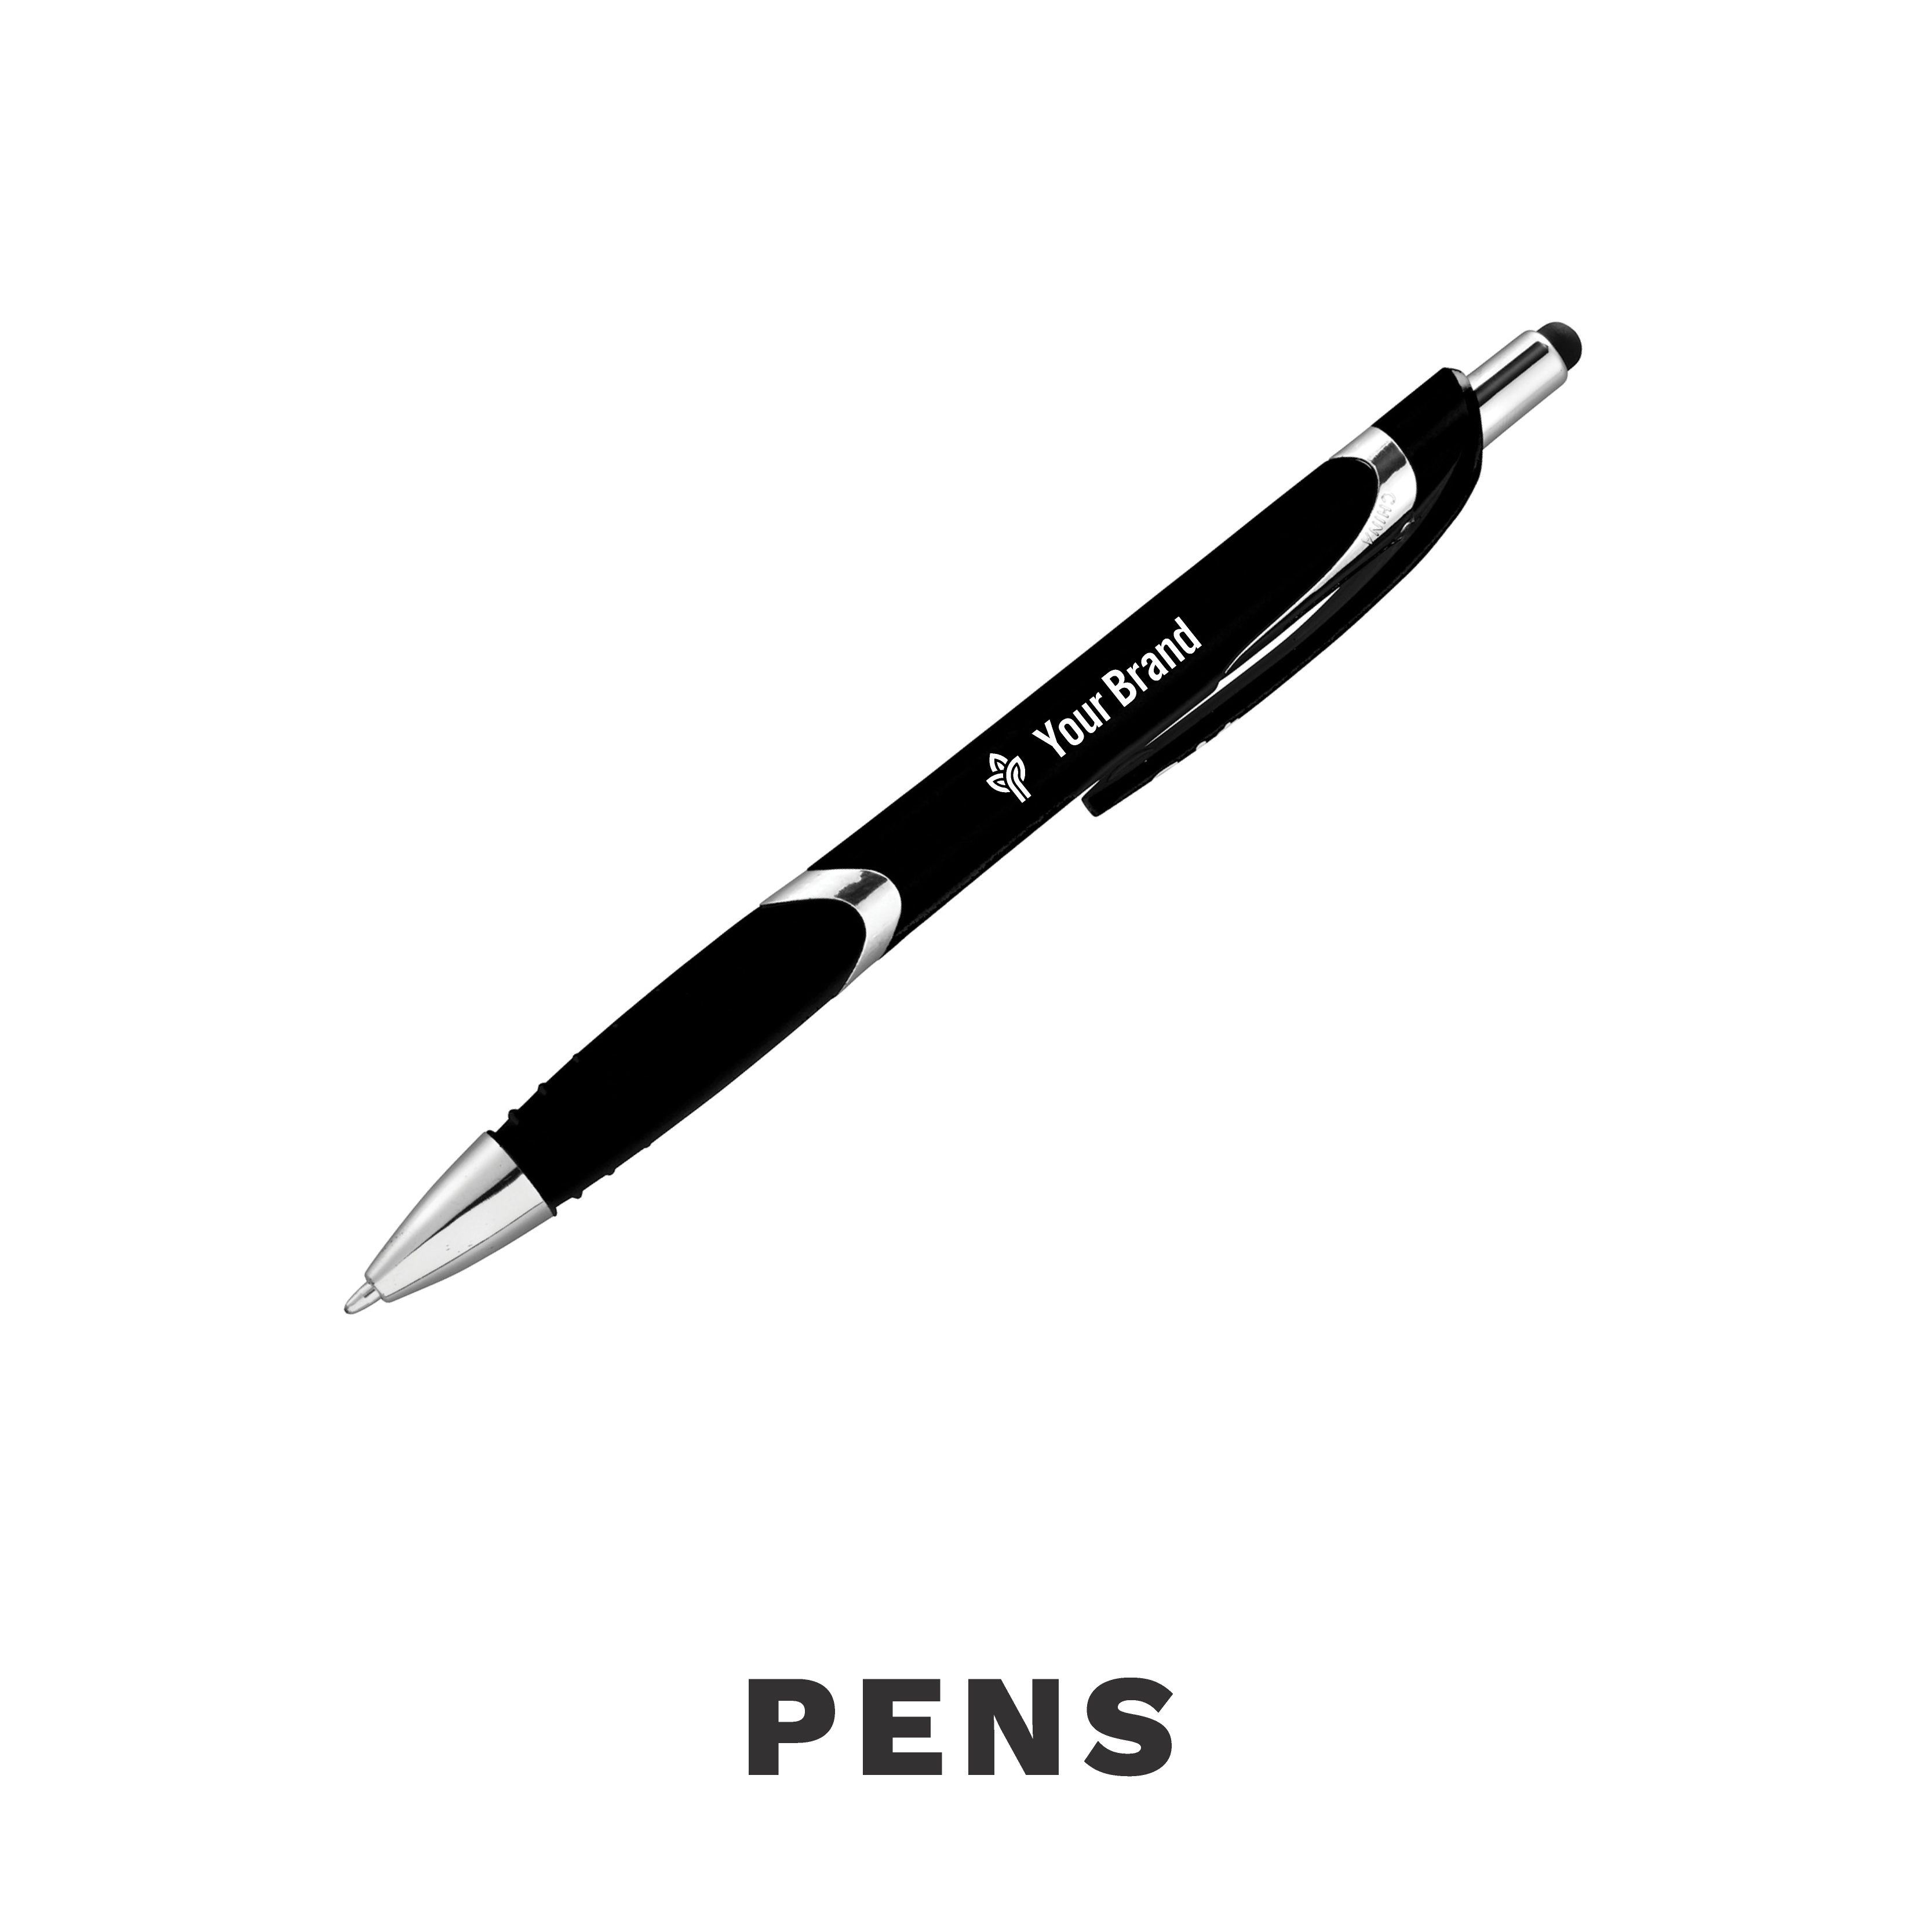 Your Brand pen